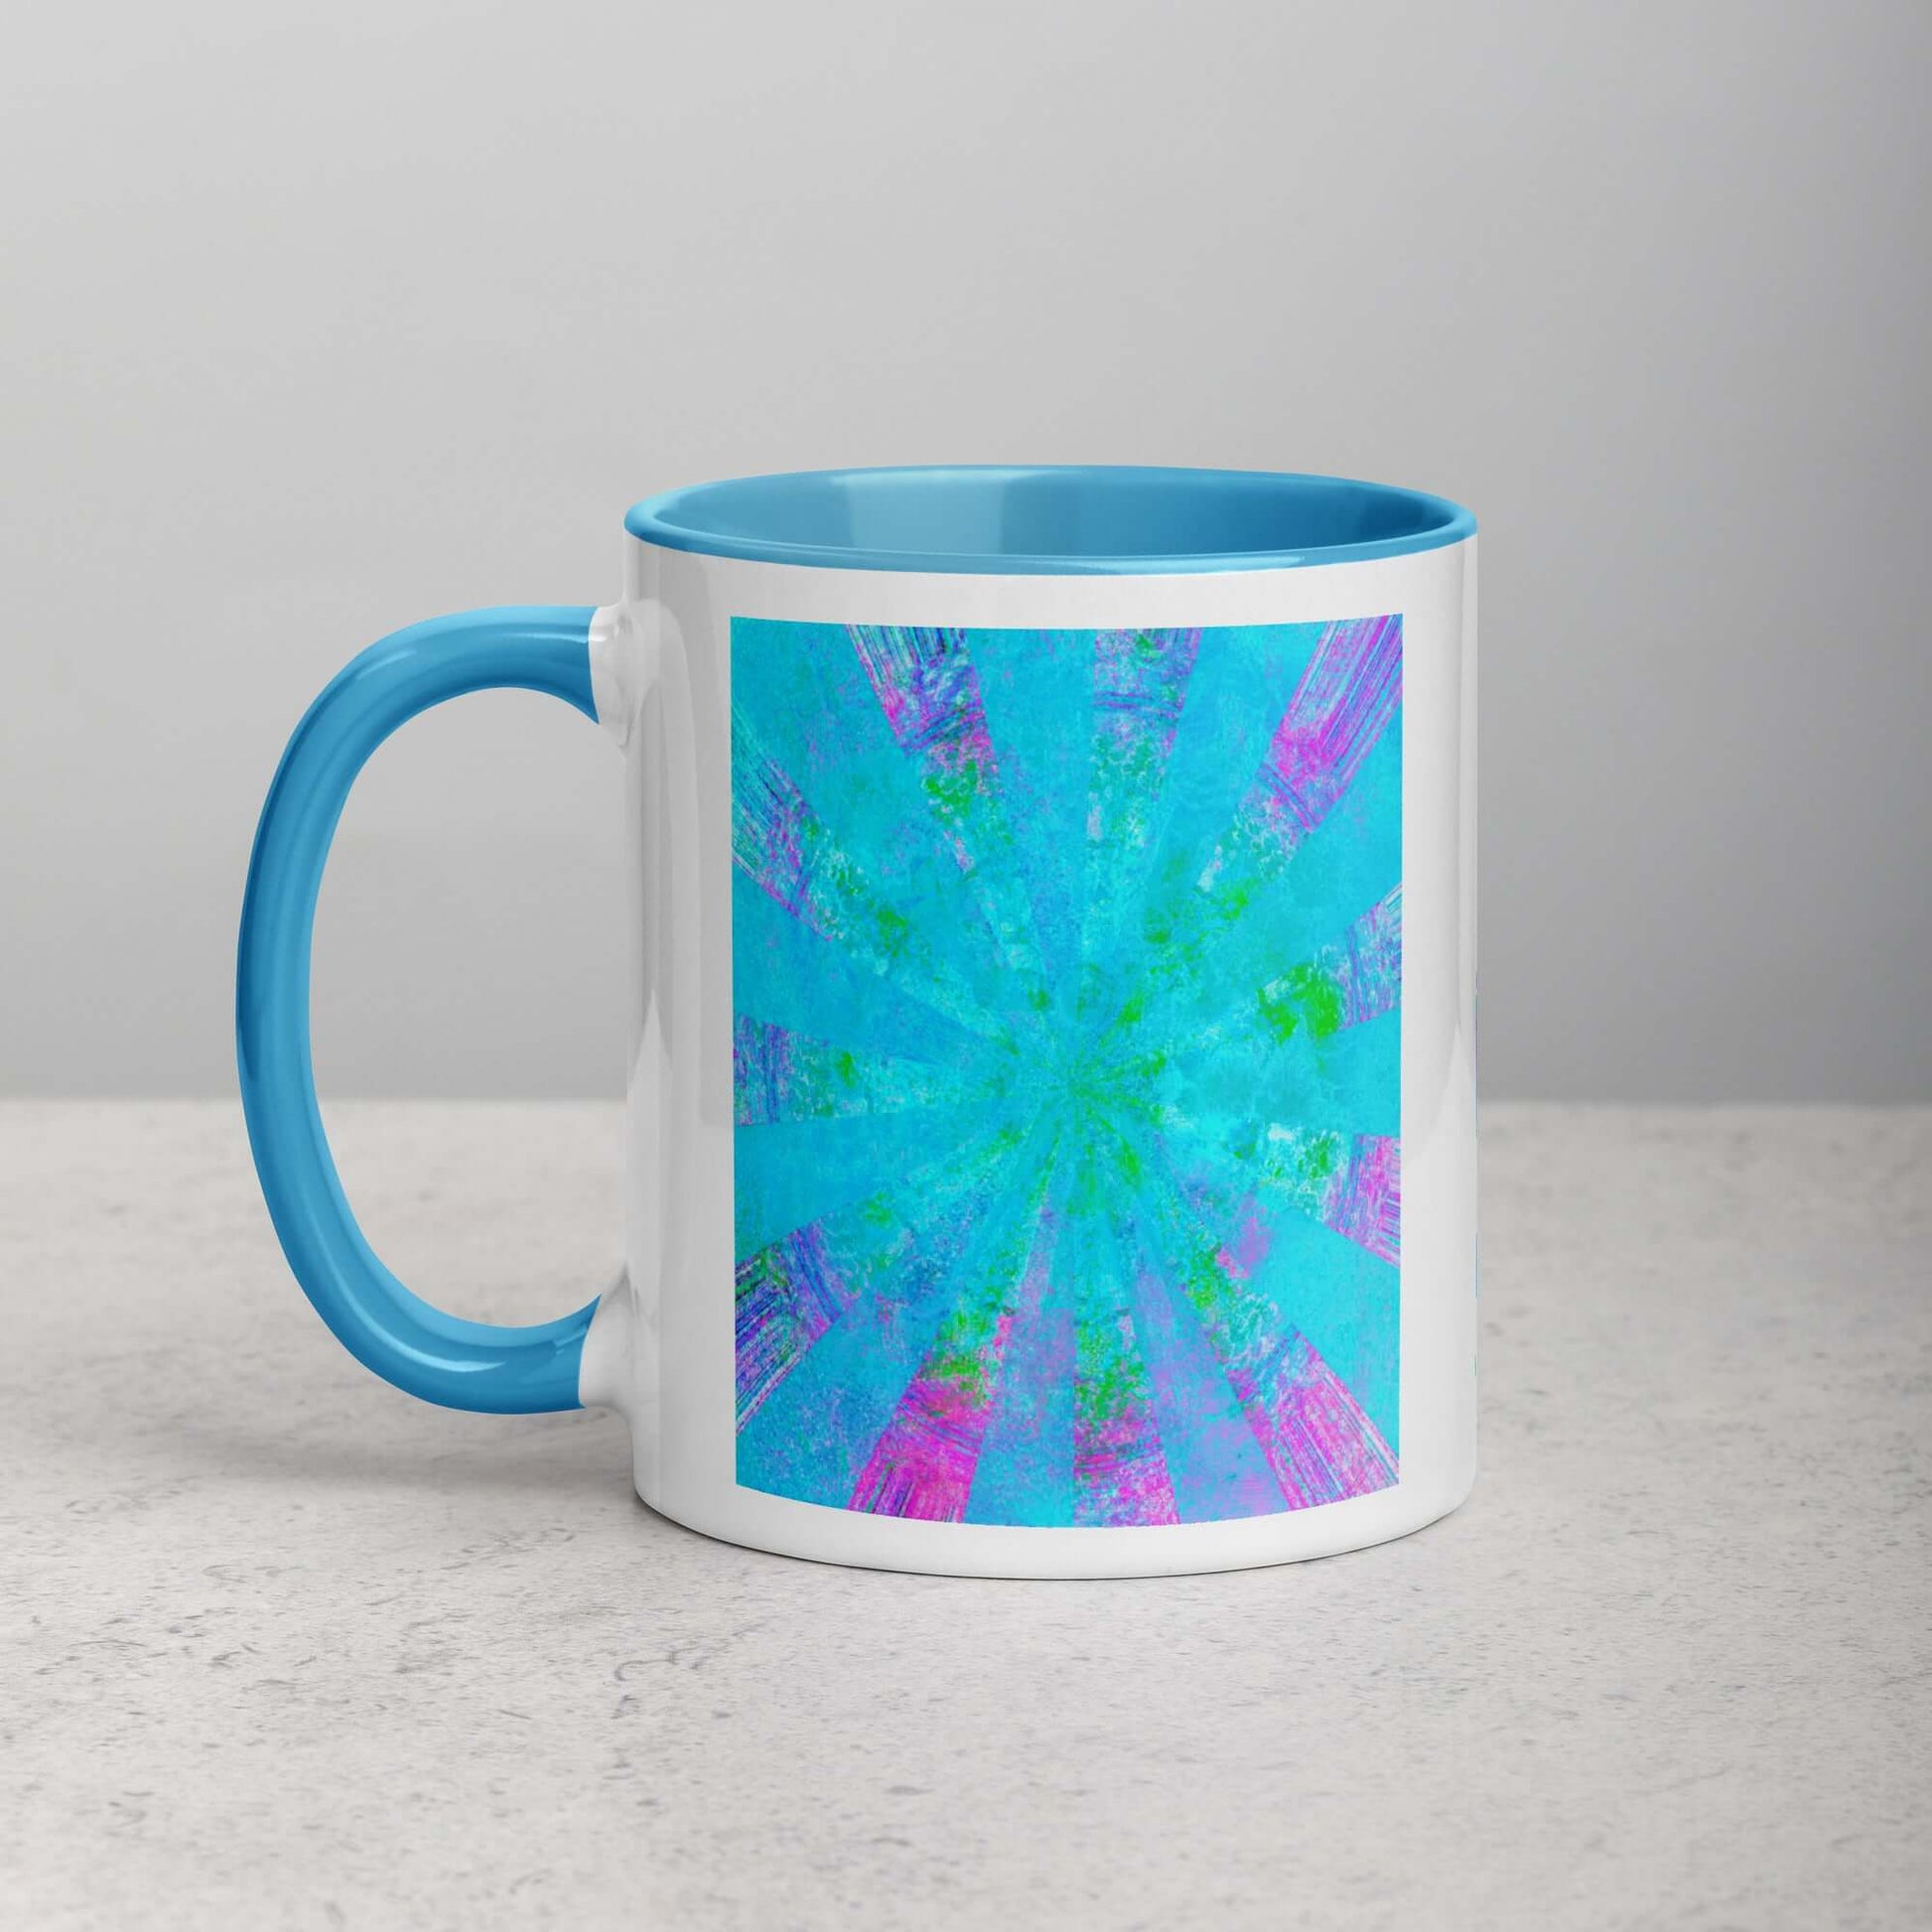 Turquoise Blue with Purple Radial “Blue Stingray” Abstract Art Mug with Light Blue Color Inside Left Handed Front View